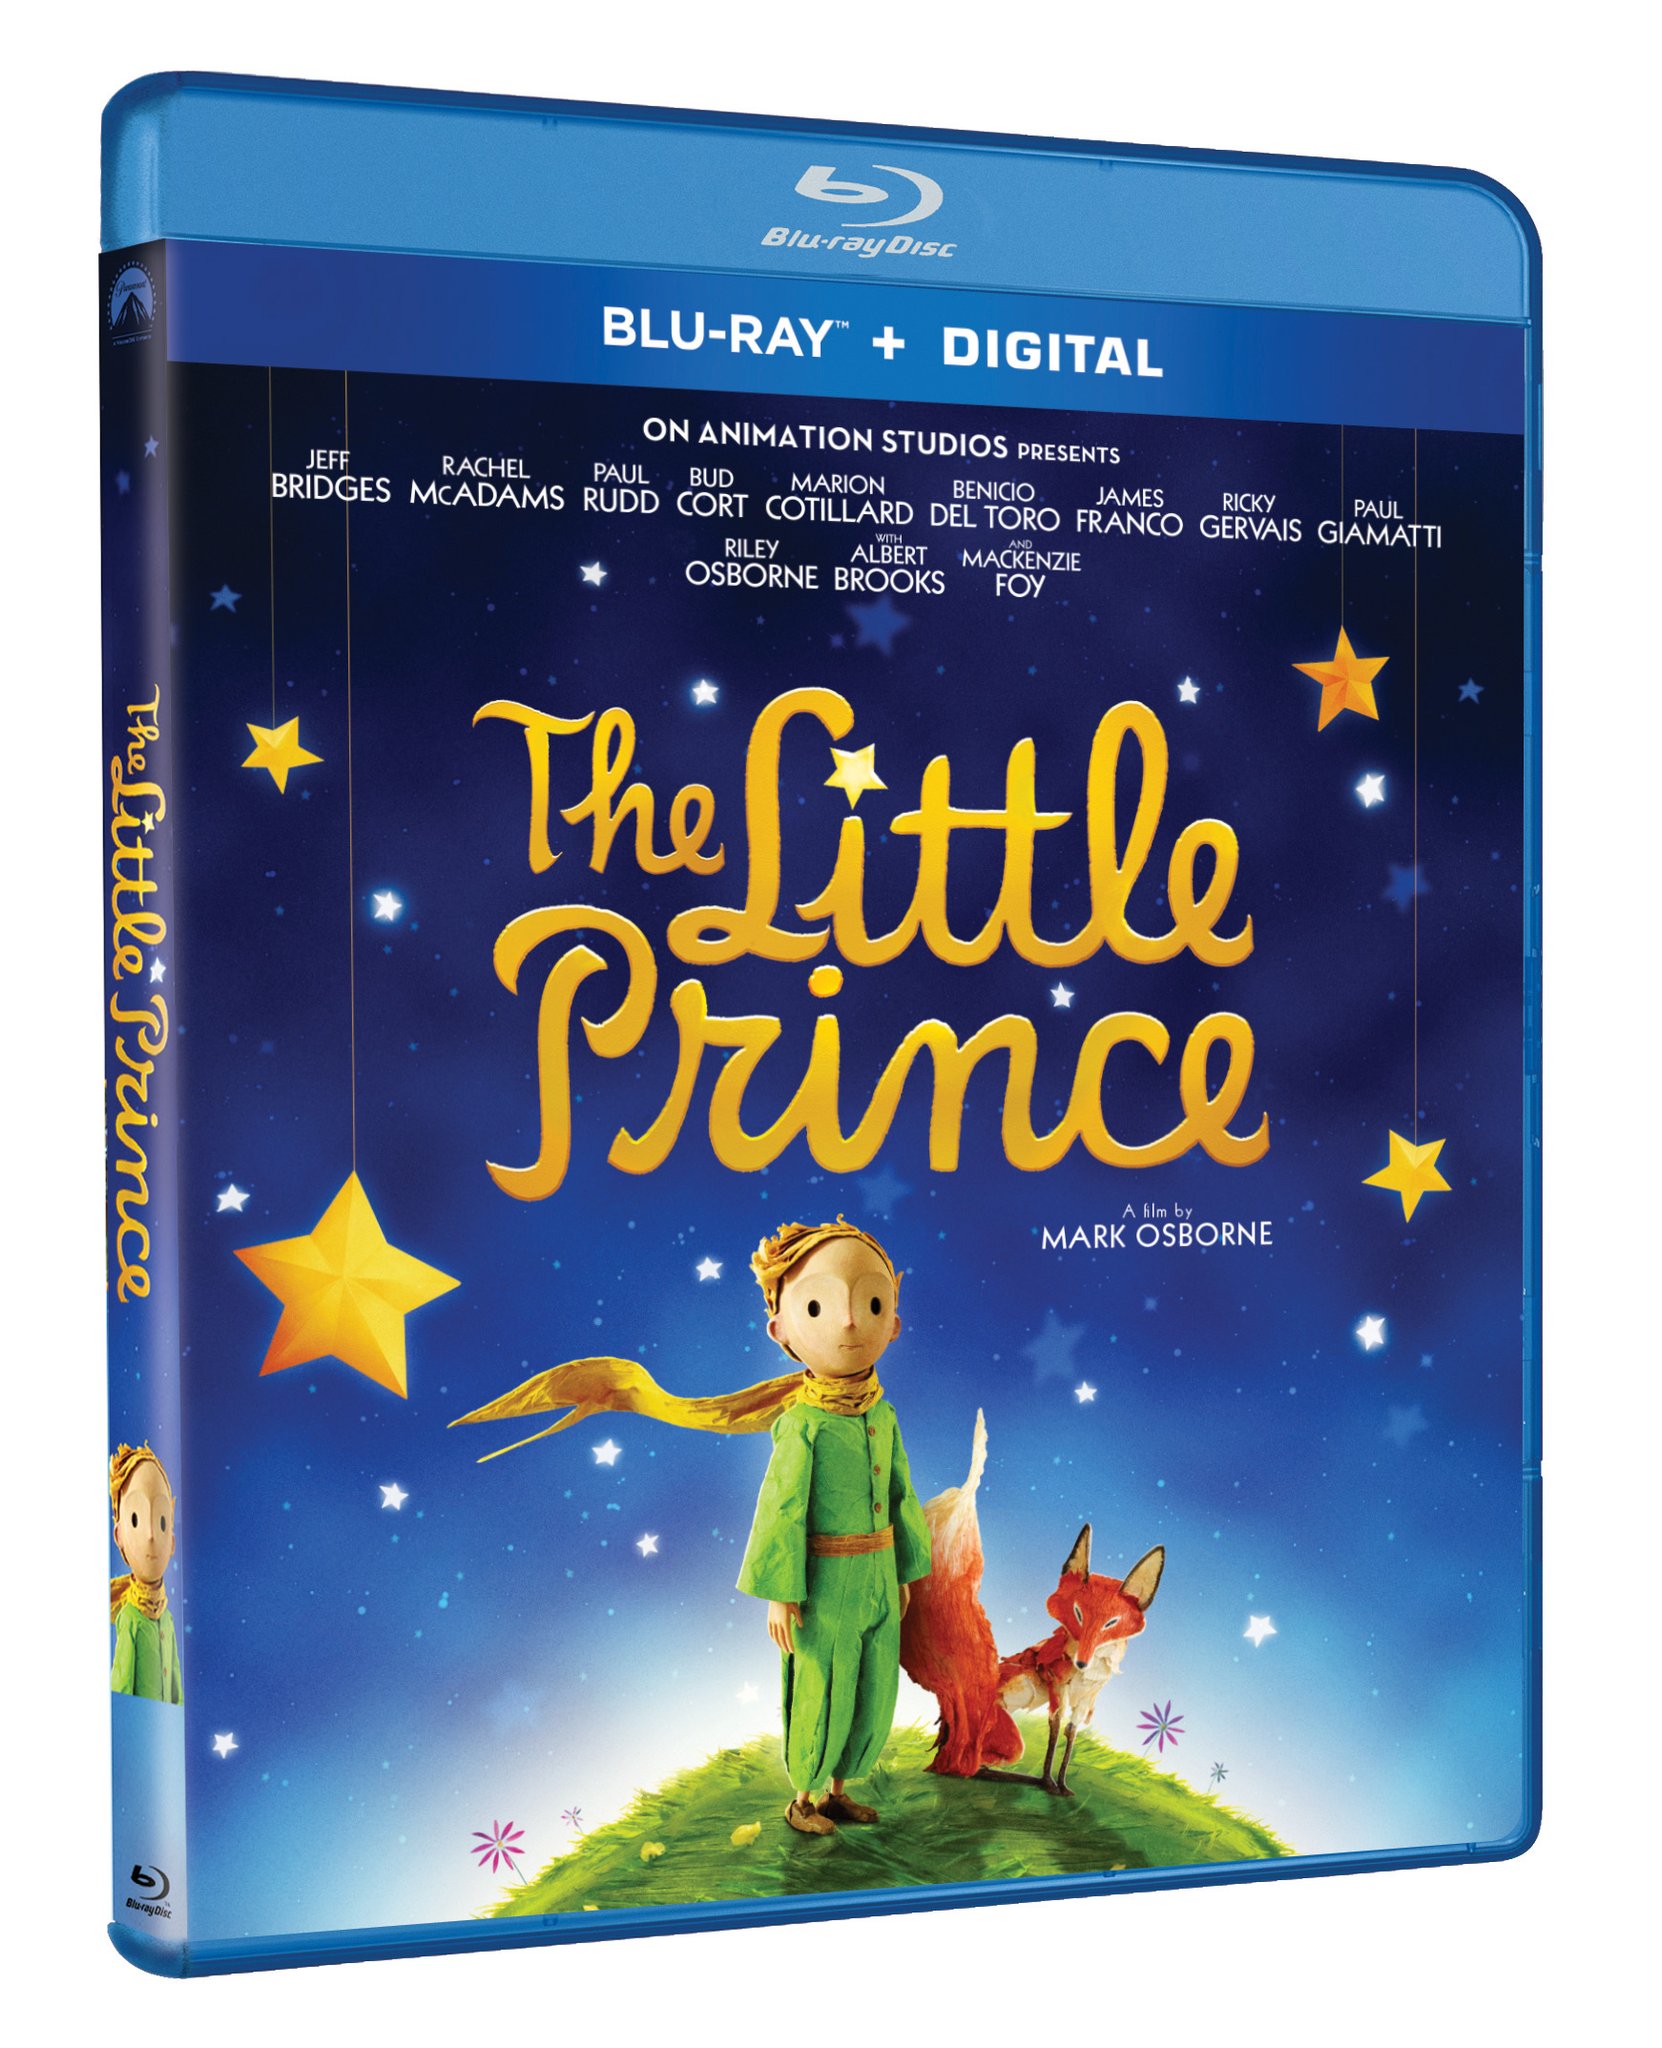 What success really is and means with The Little Prince